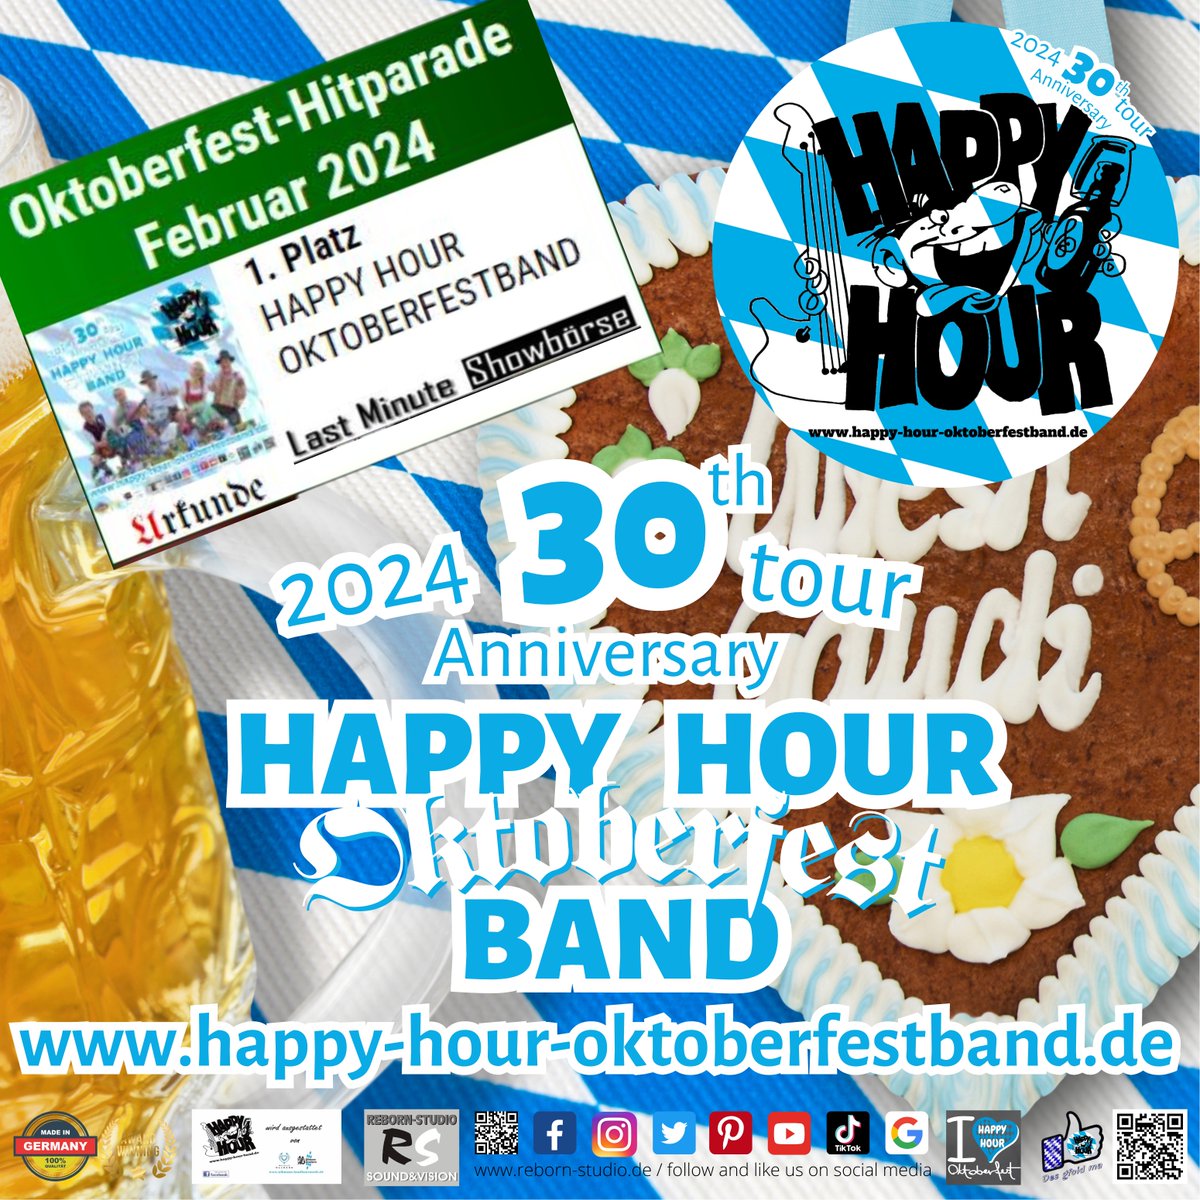 HAPPY HOUR OKTOBERFESTBAND - 30th Anniversary tour 2024 - PARTY with THE No. 1 🥇🎼👍 We're celebrating our 30th Anniversary this year! And we hope YOU are all celebrating YOUR Oktoberfest in a most authentic Bavarian style with US! booking@happy-hour-oktoberfestband.de